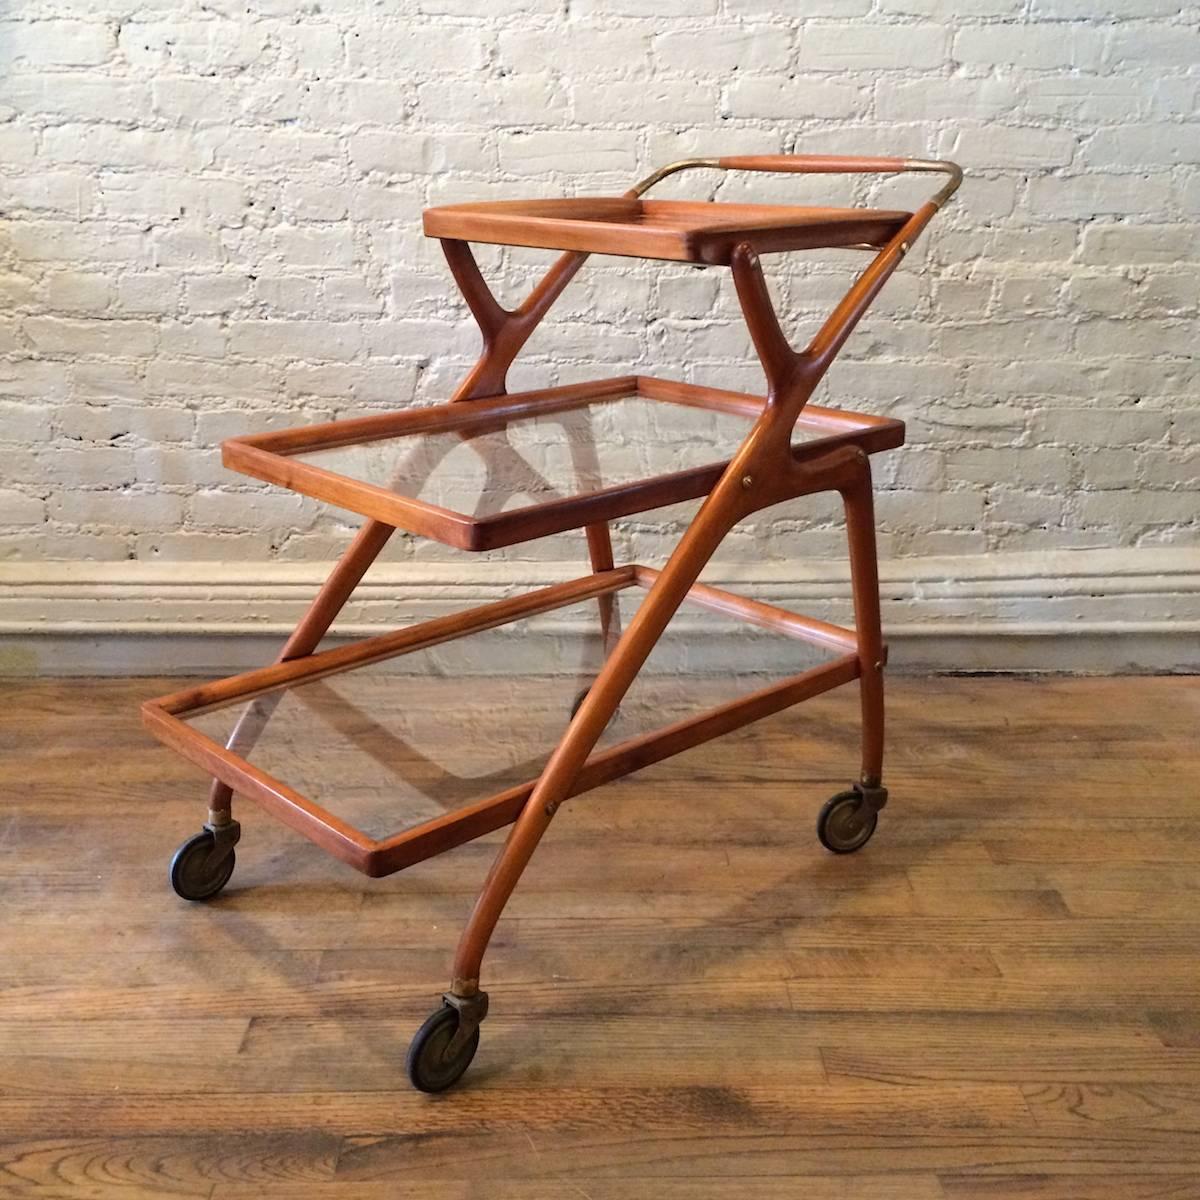 Italian, Mid-Century Modern, three-tier, rolling bar cart by Cesare Lacca with teak and brass frame and glass shelves. Top tier is removable for serving.